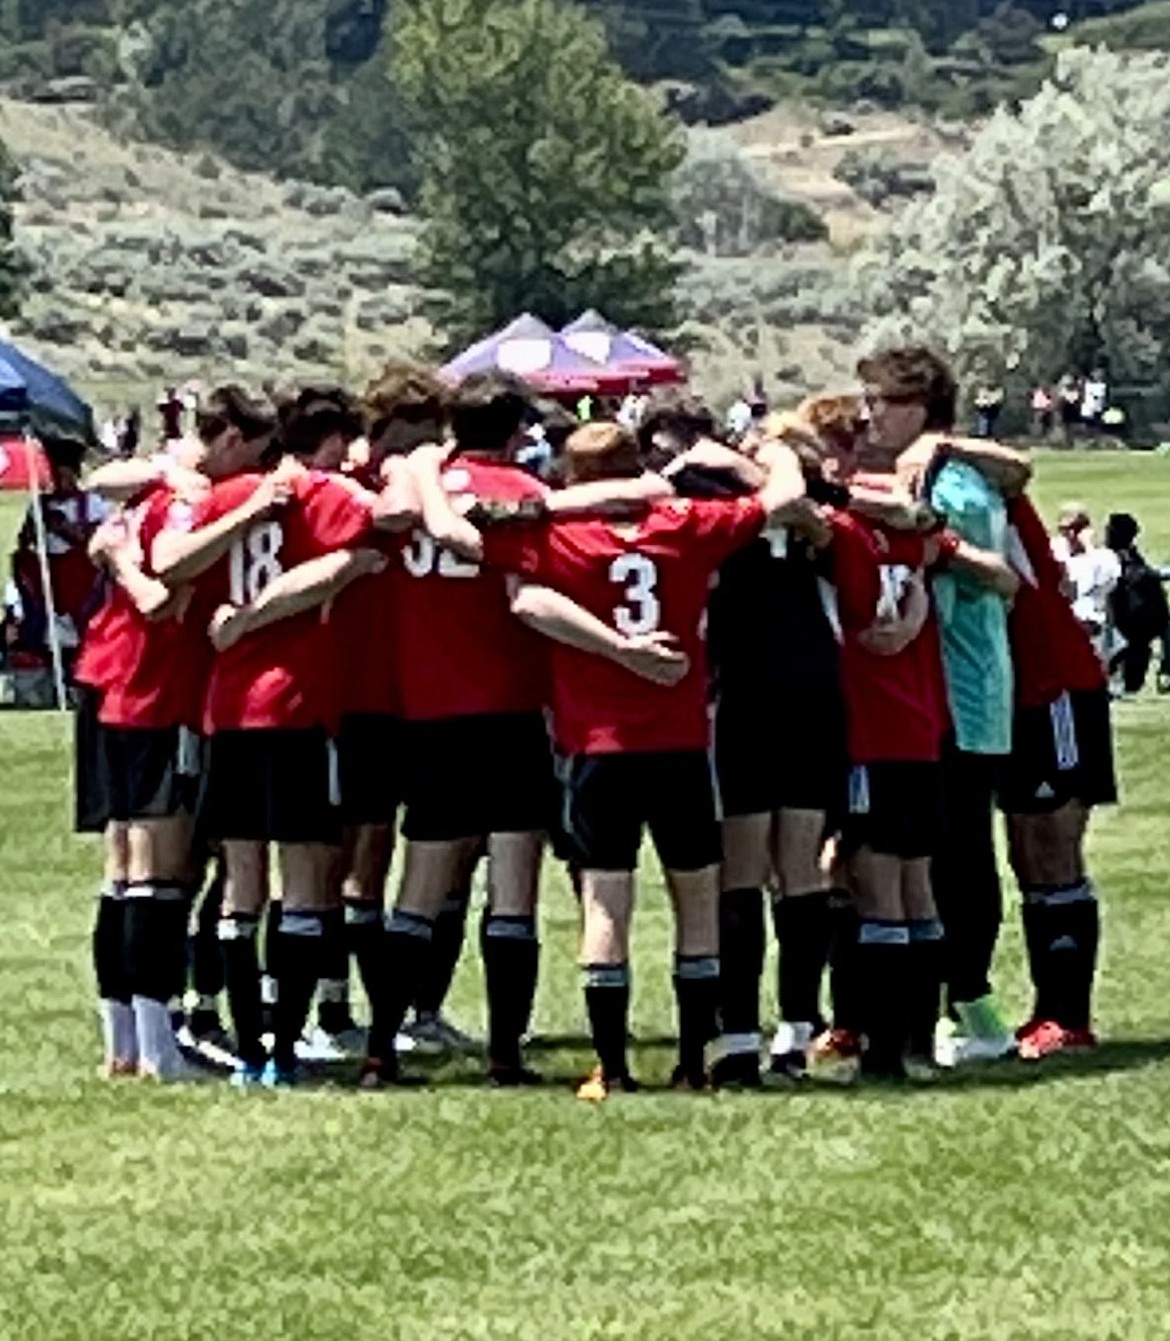 Photo by MIKE THOMPSON
The Timbers North FC 05 boys won their opener at the US Youth Soccer Far West Presidents Cup on Friday at the Simplot Sports Complex in Boise.